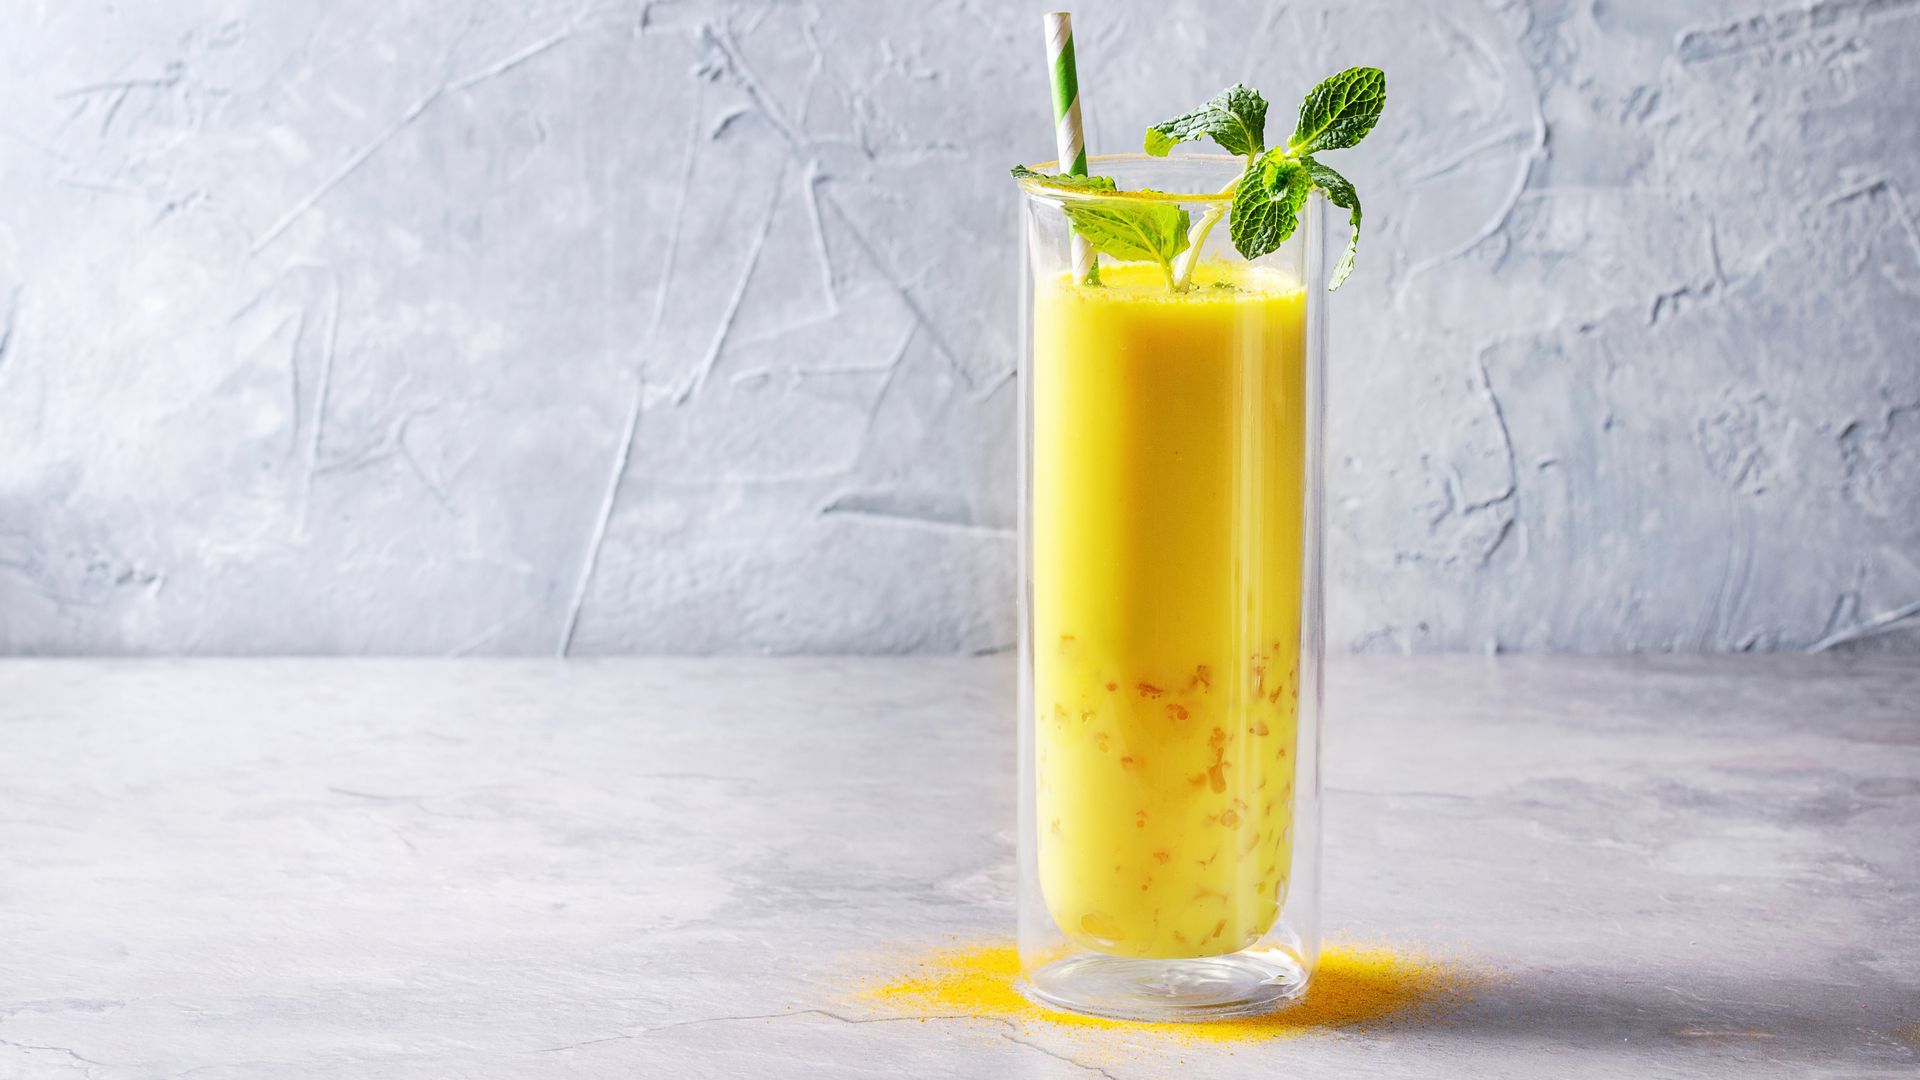 A tall glass holding a bright yellow drink on a marble table